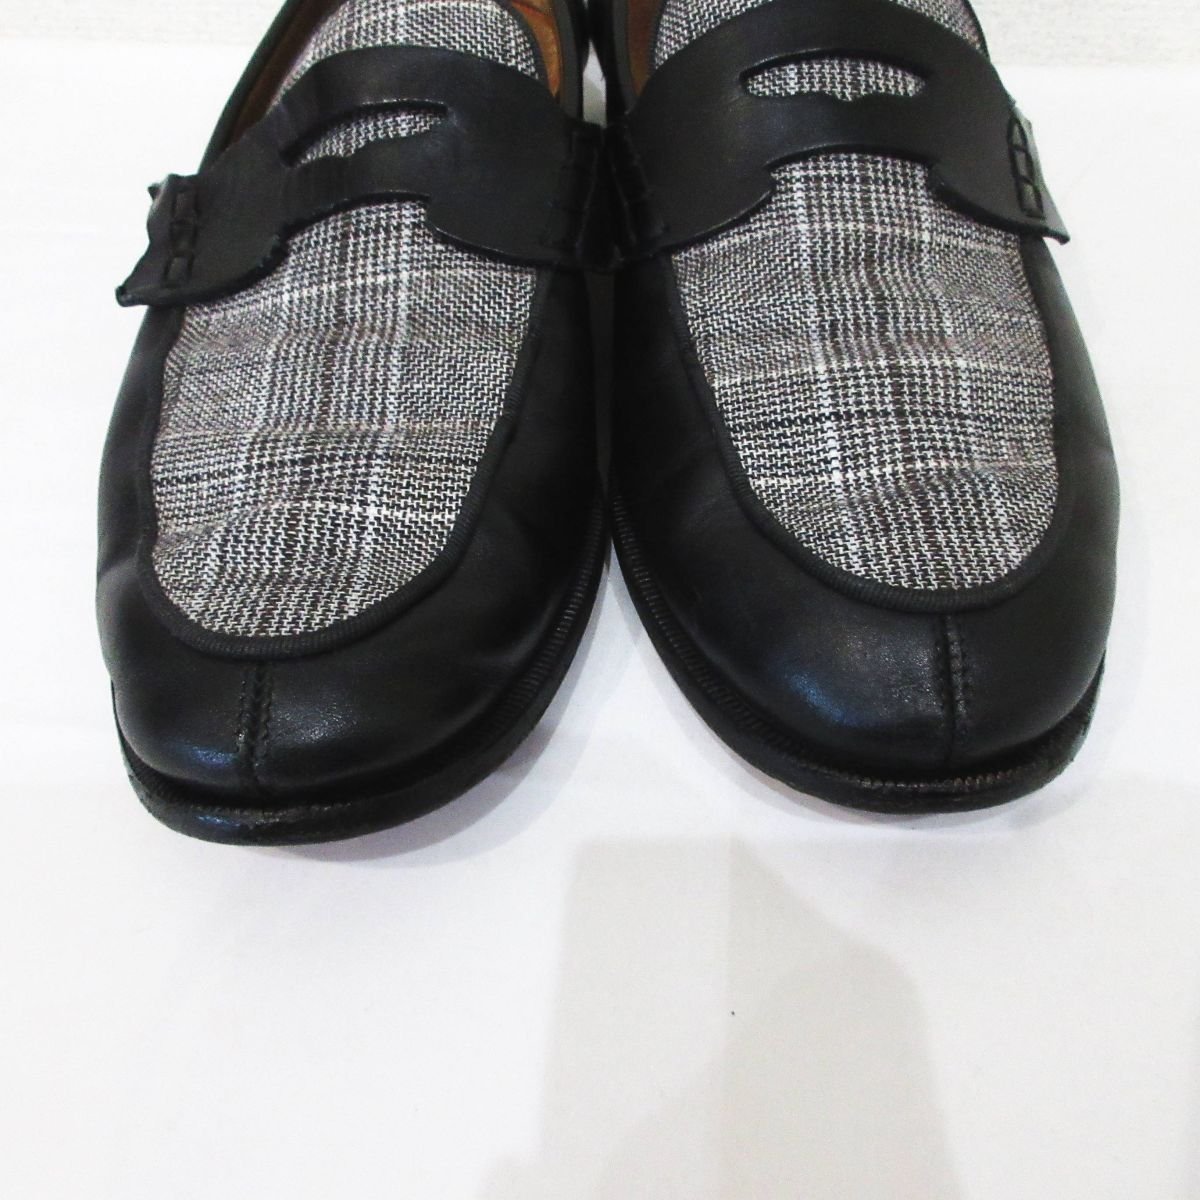  beautiful goods Christian Louboutin Christian Louboutin check pattern leather Loafer slip-on shoes size 42 approximately 27cm black × gray 